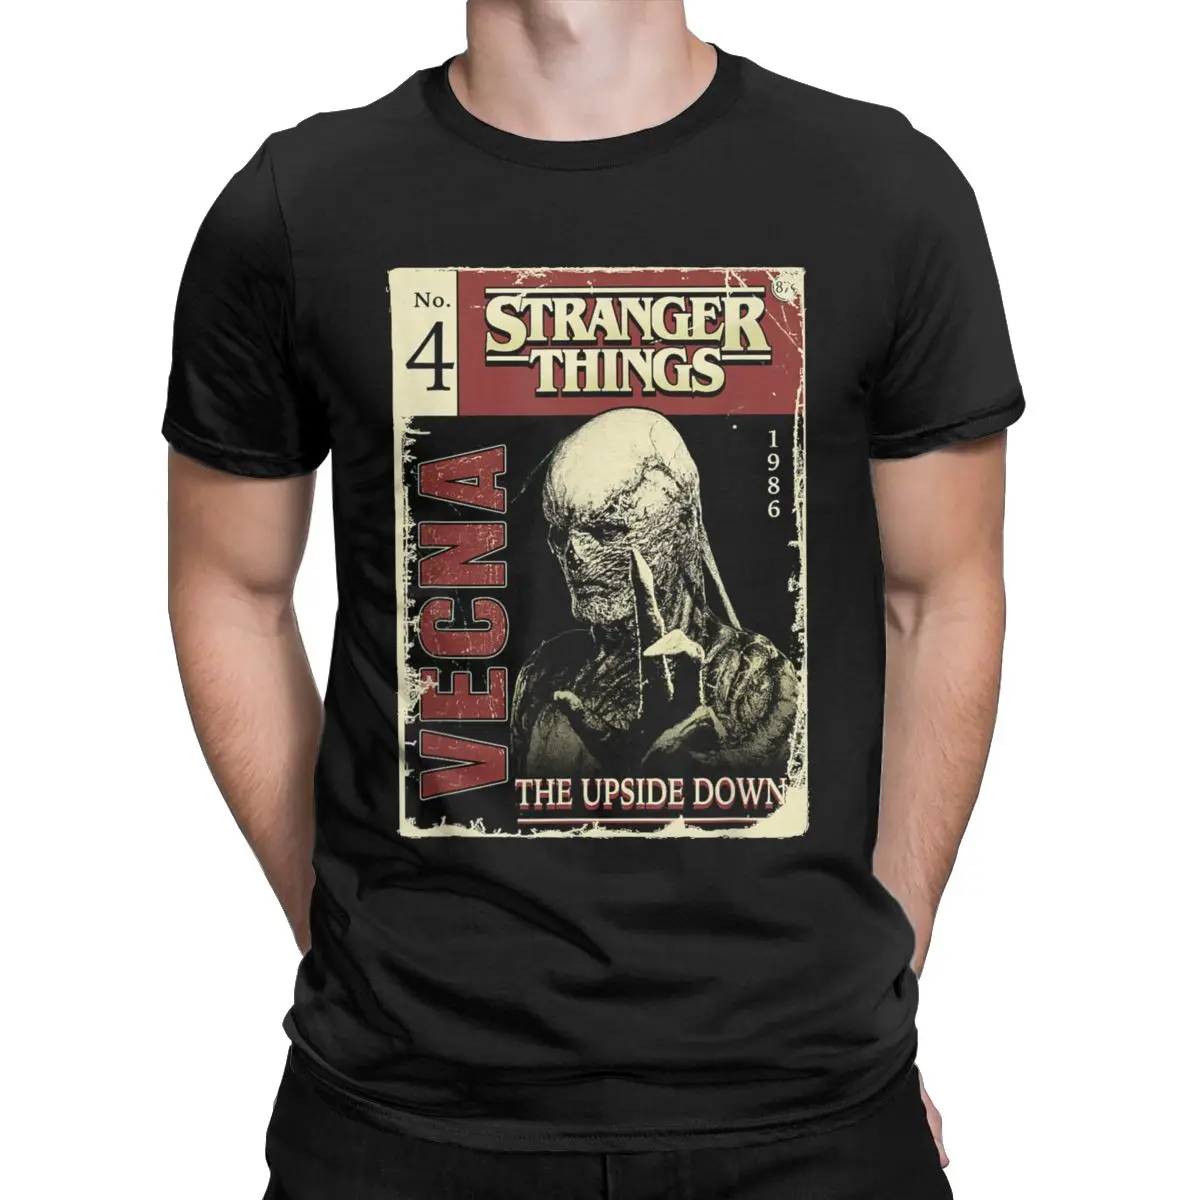 

Strang Things VECAN T Shirt for men Unique Pure Cotton Tees Short Sleeve Stranger Things 4 T Shirts Crew Neck Clothing Party